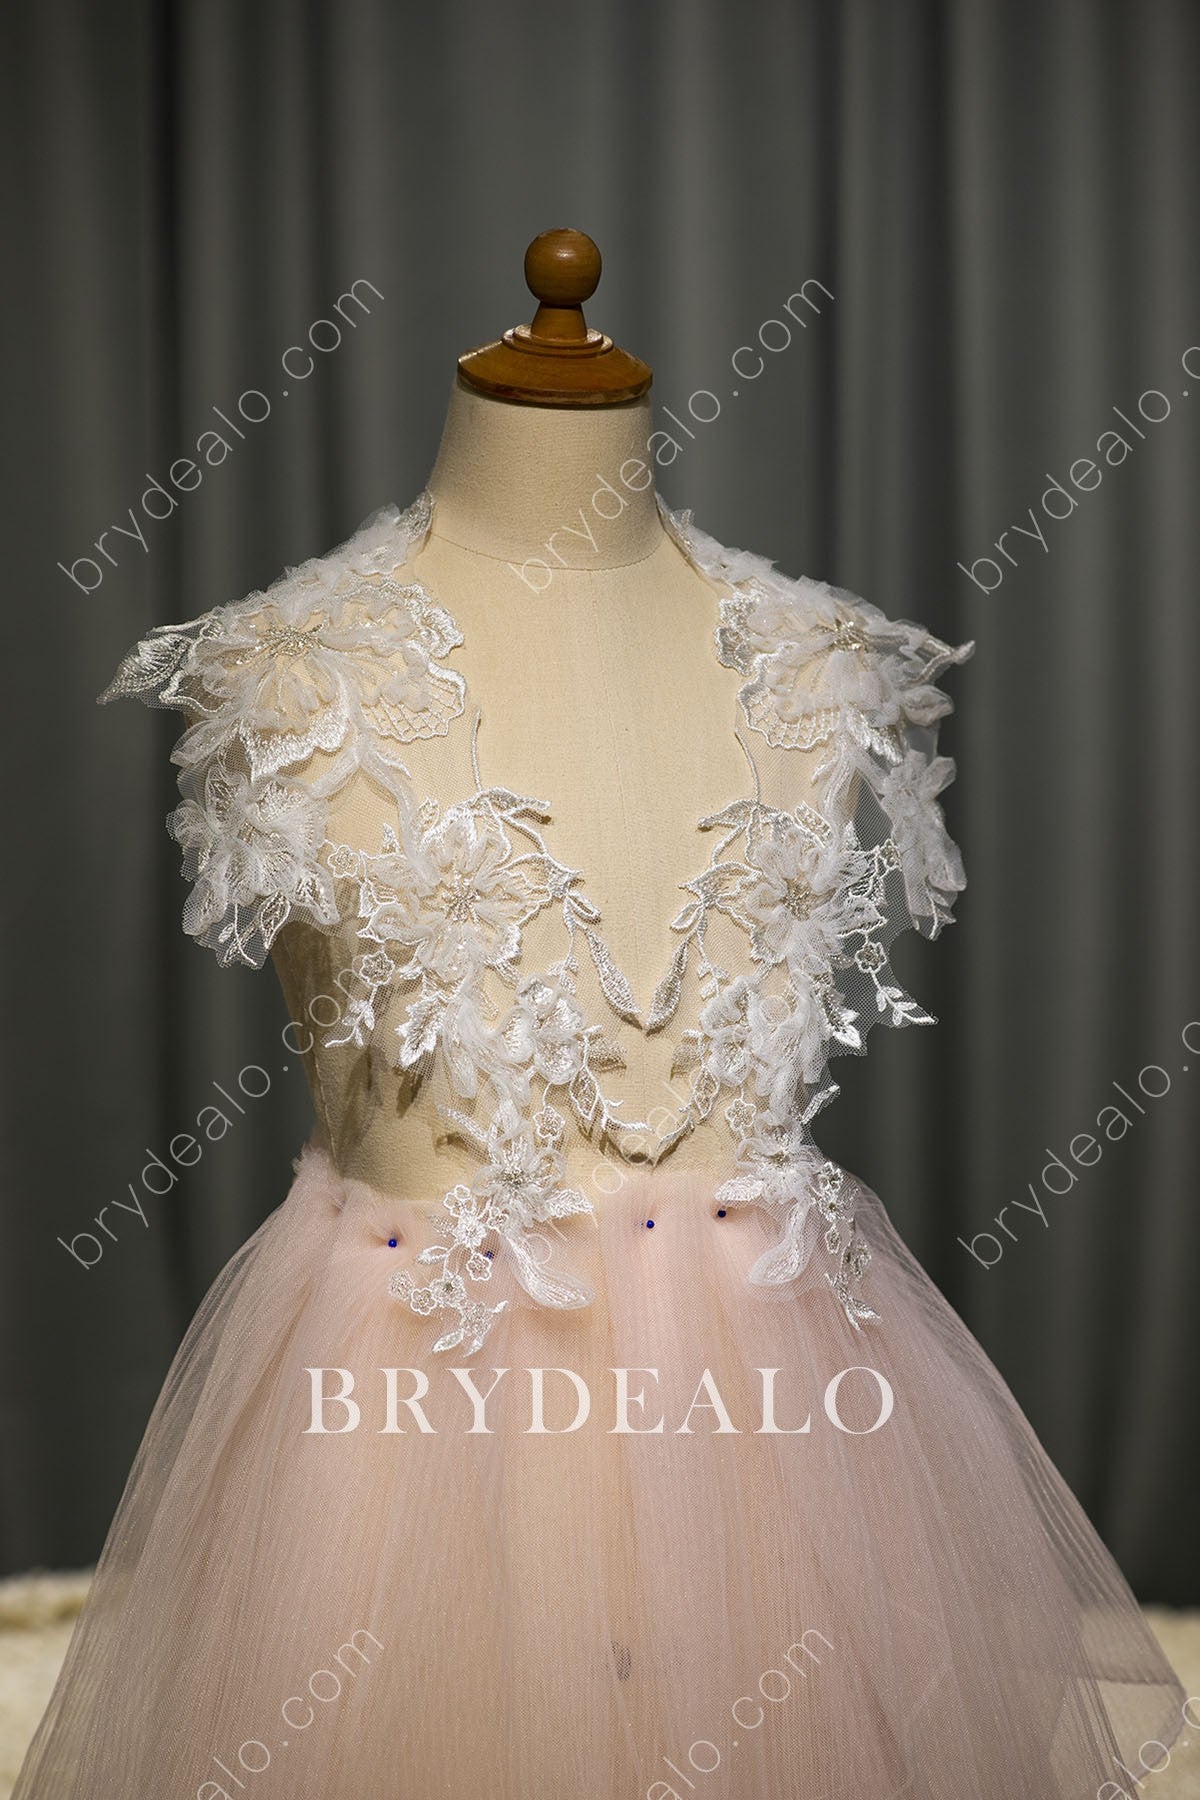 Fairy 3D Tulle Flower Embroidery Lace Applique